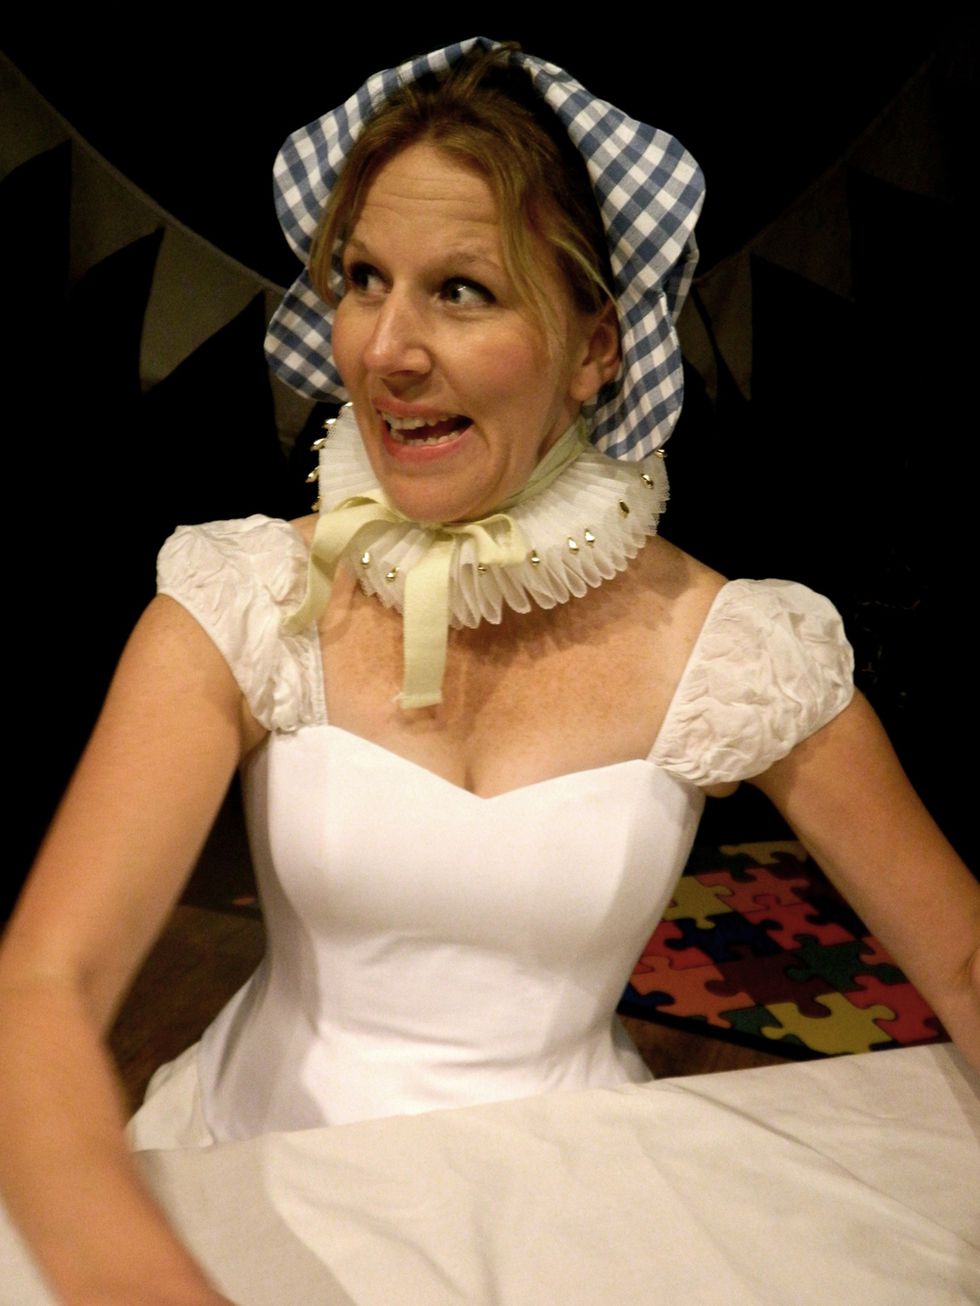 CreativeCow_MerryWives_Katherine Senior as Mistress Page_sm.jpg